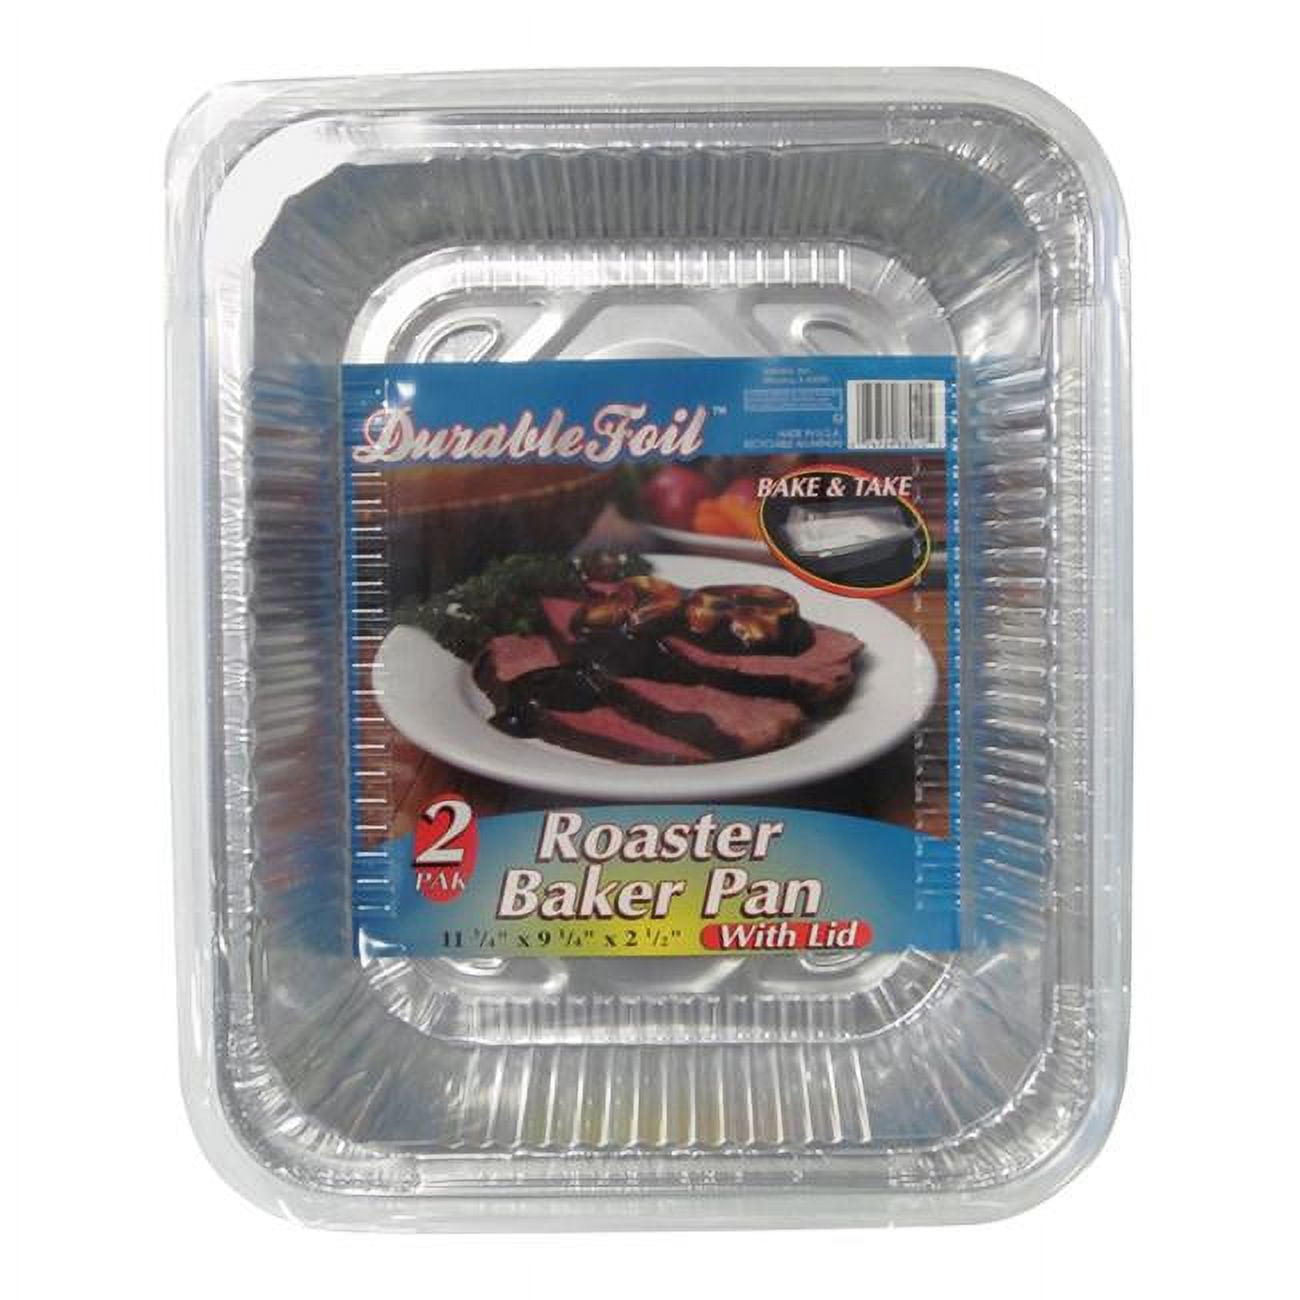 6392146 9.25 X 11.75 In. Durable Foil Roaster Pan With Lid - Silver- Pack Of 12